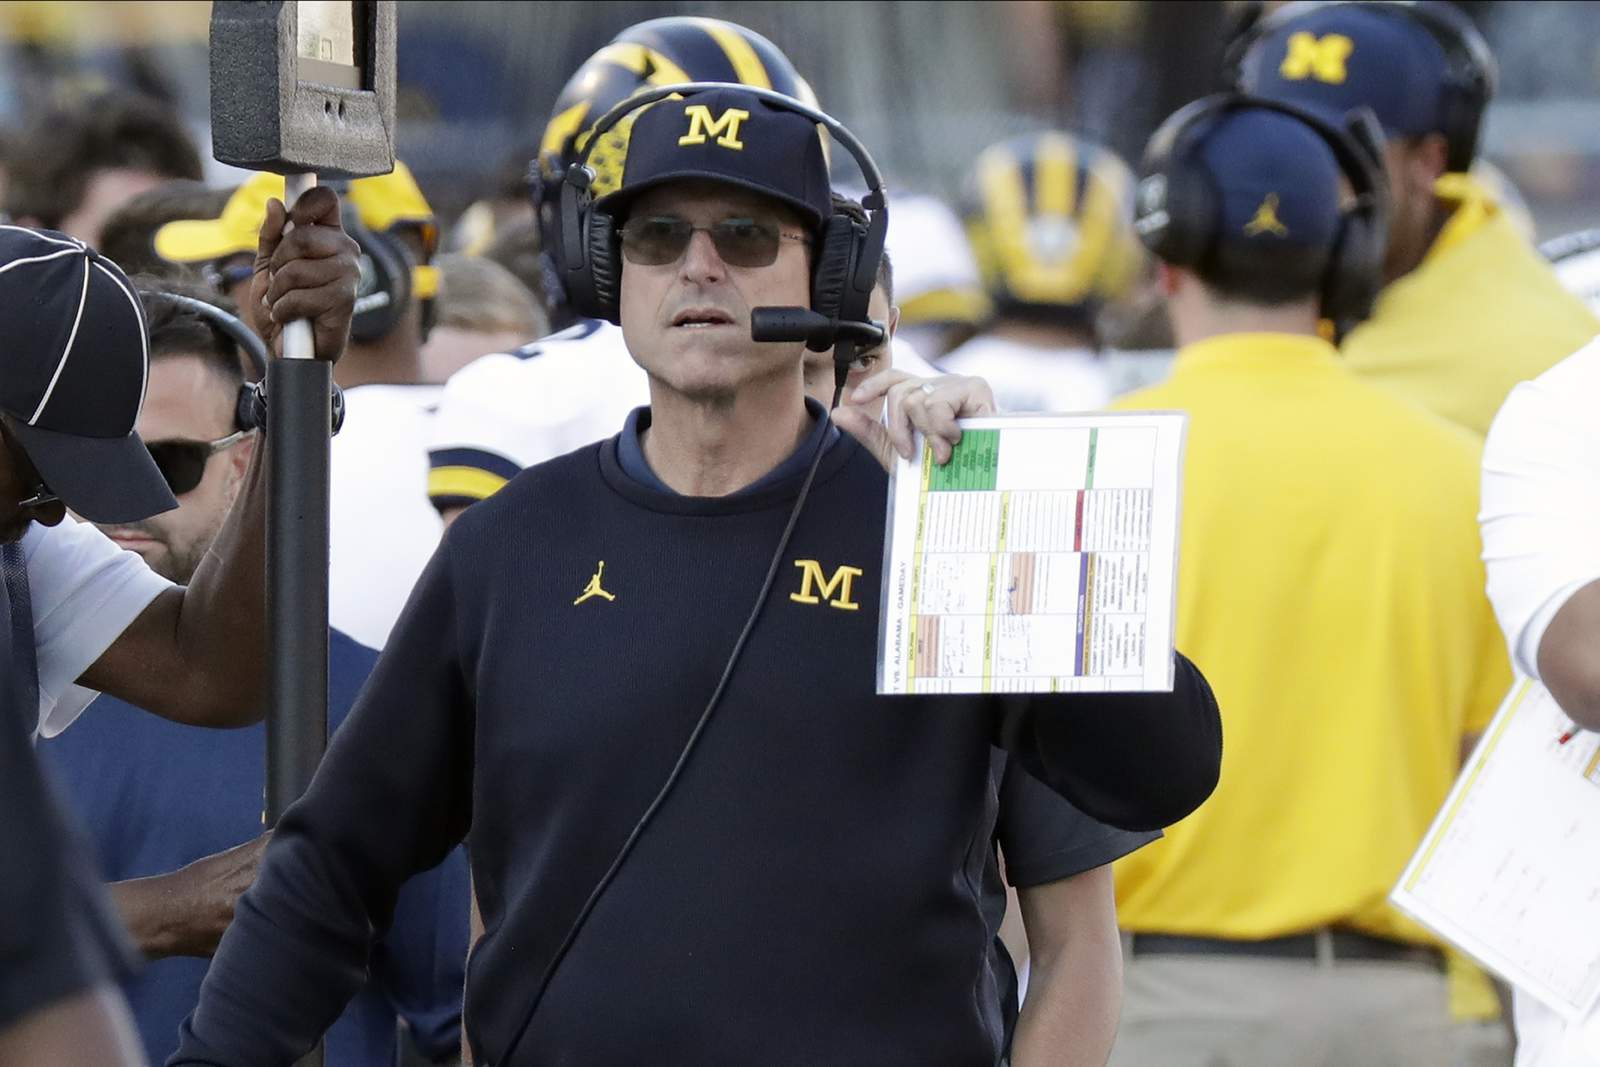 'Work to be done": Harbaugh has new, 5-year deal at Michigan